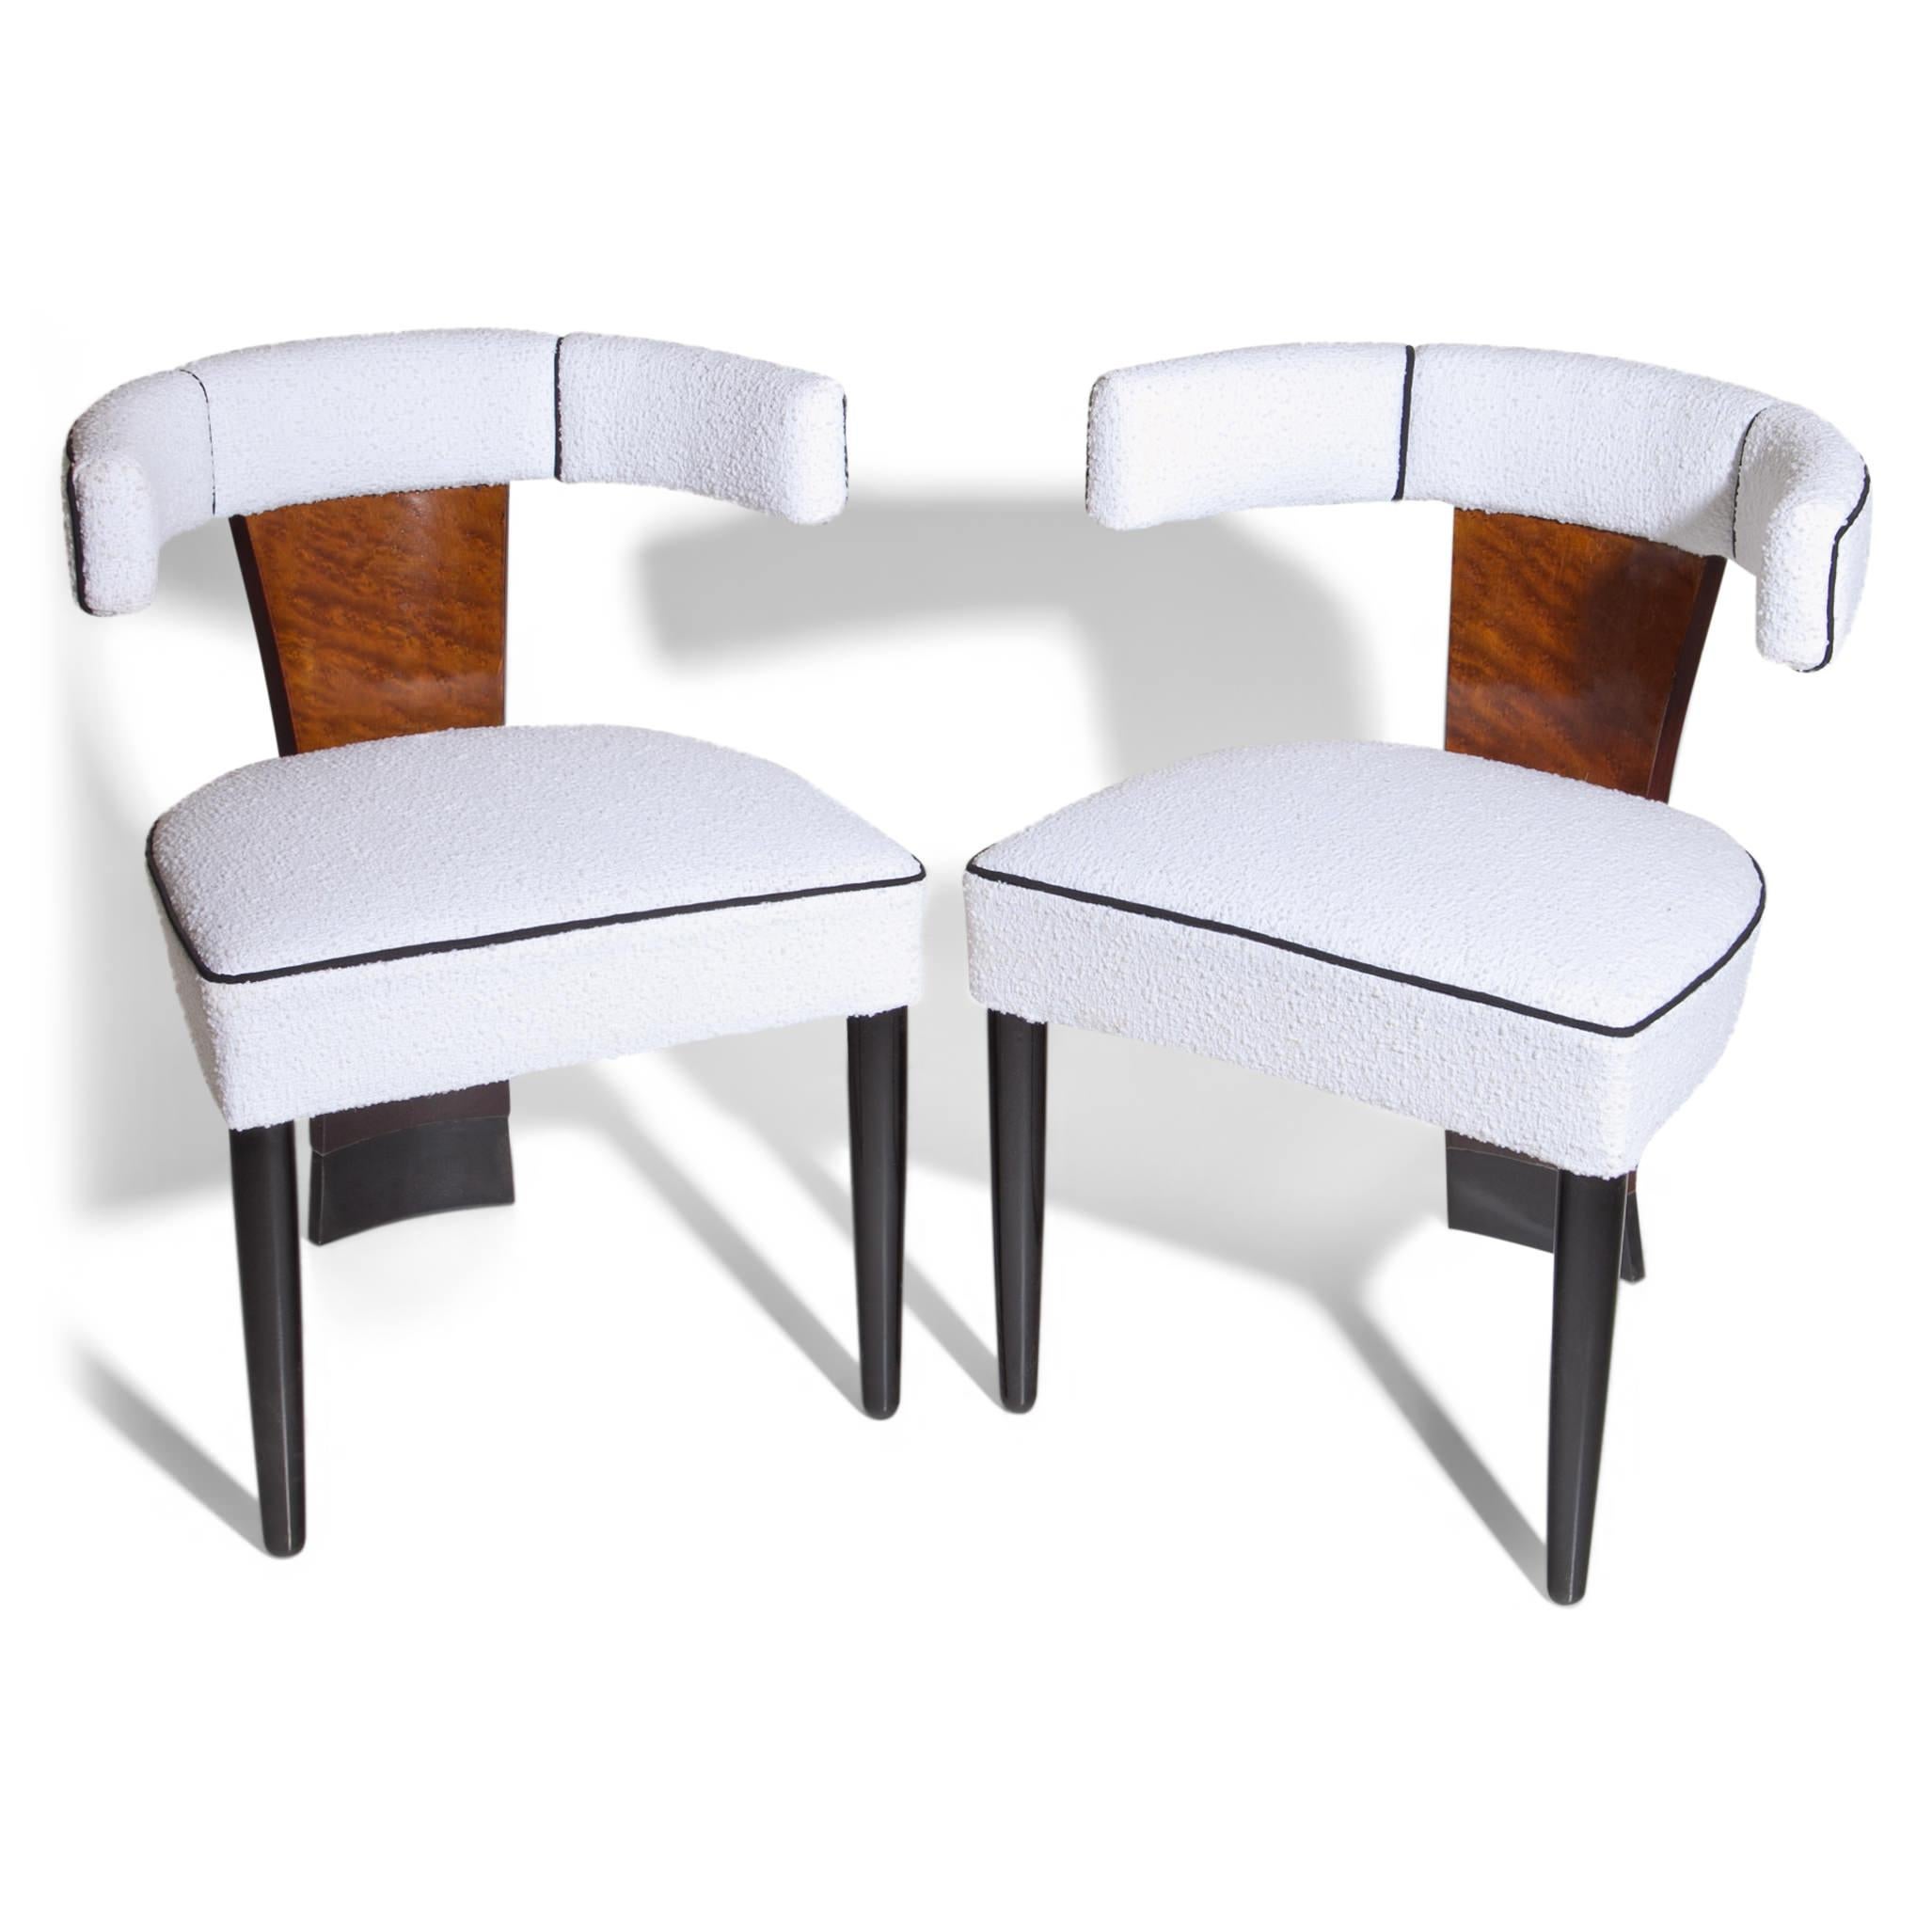 Pair of chairs, standing on ebonized tapered legs. The backrest and rear foot is one long piece. The chairs were reupholstered with a white bouclé fabric with black piping.